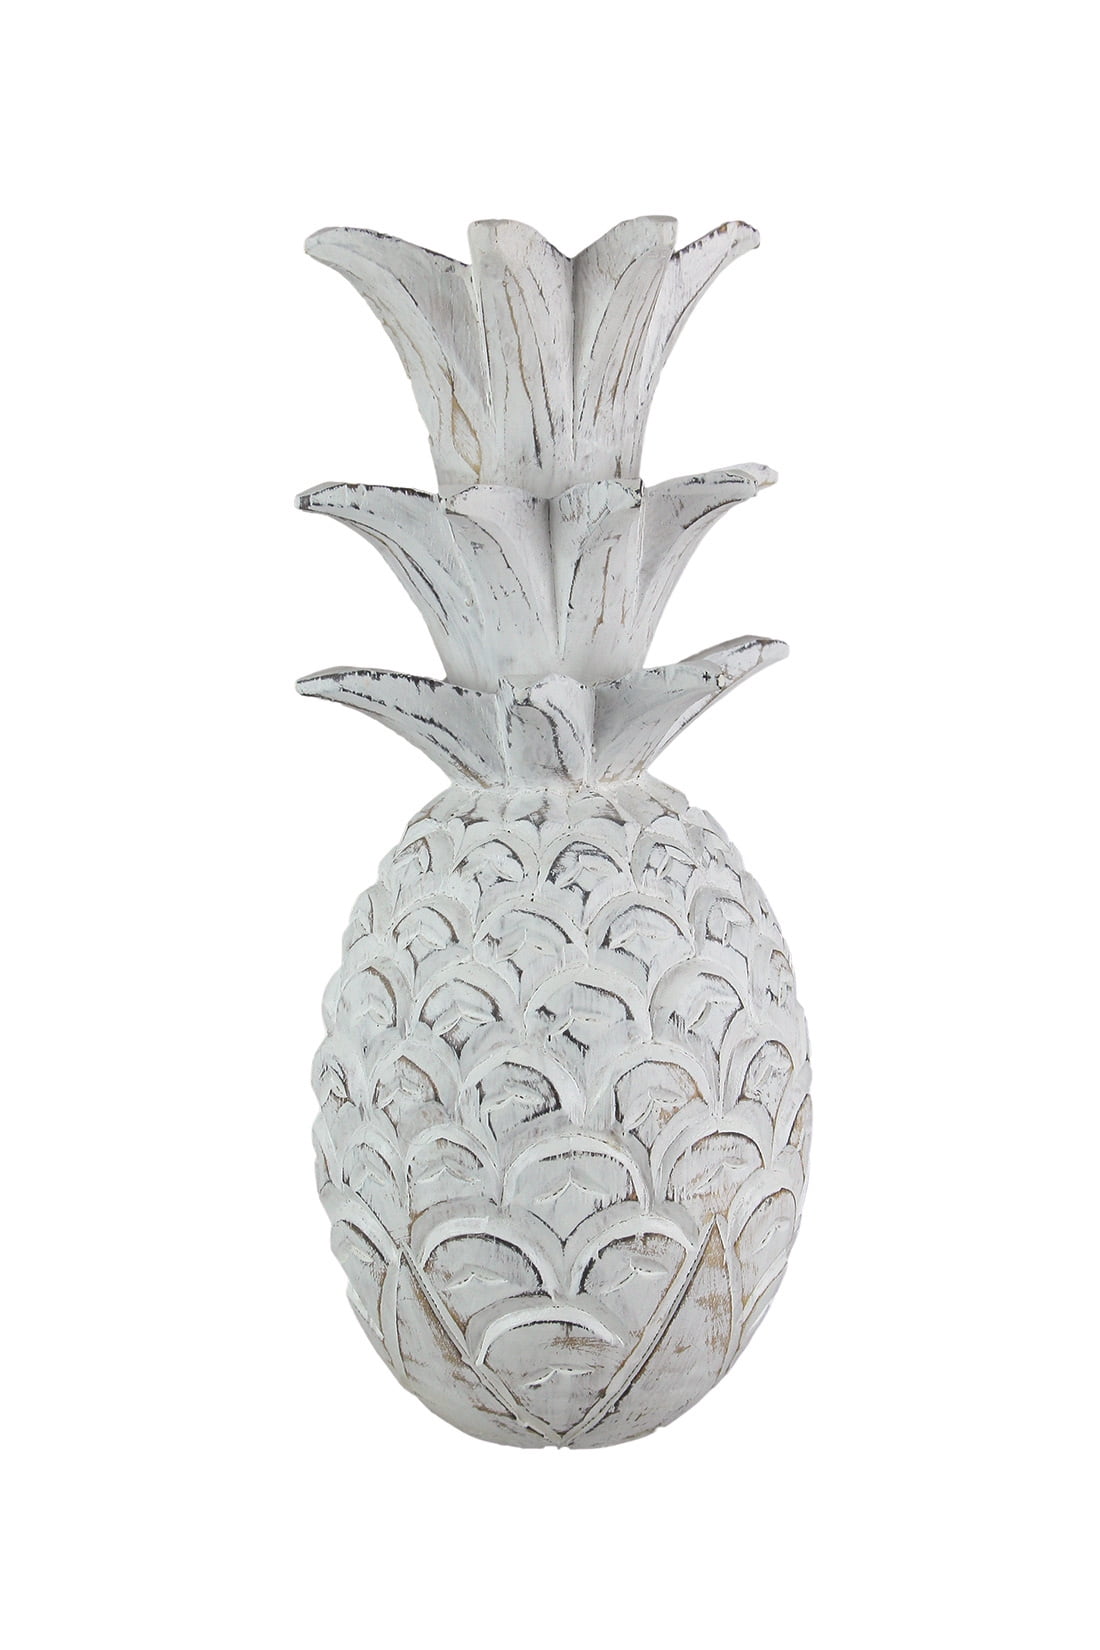 Chesapeake Bay Ltd 15.5 inch White Carved Wood Pineapple Hanging Wall Art  Sculpture